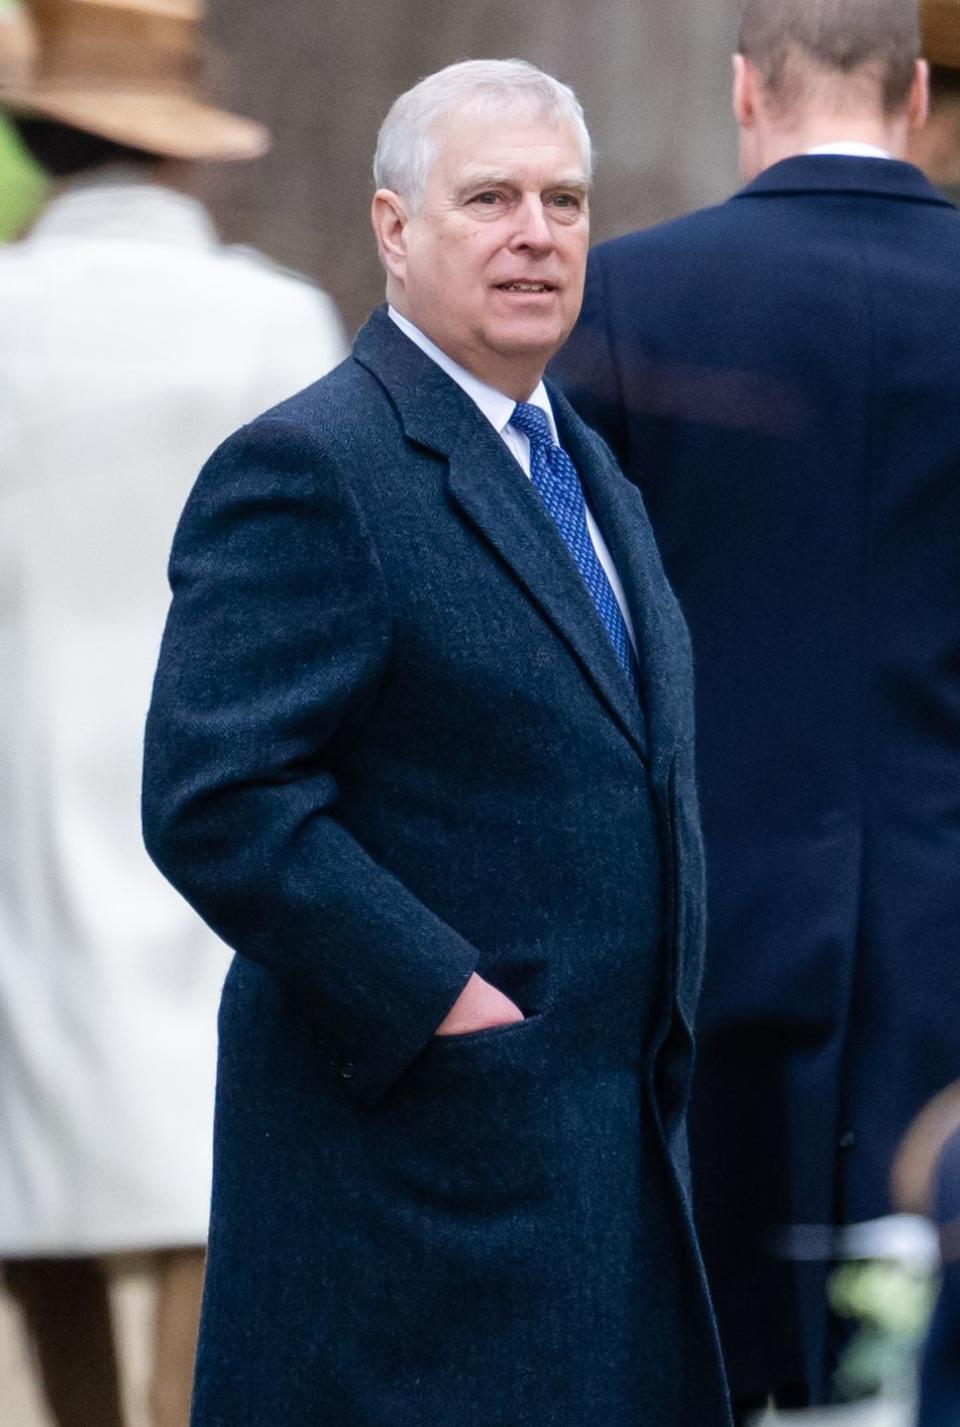 prince andrew stands with his hand in his coat pocket, he wears a white collared shirt and blue patterned tie and looks right